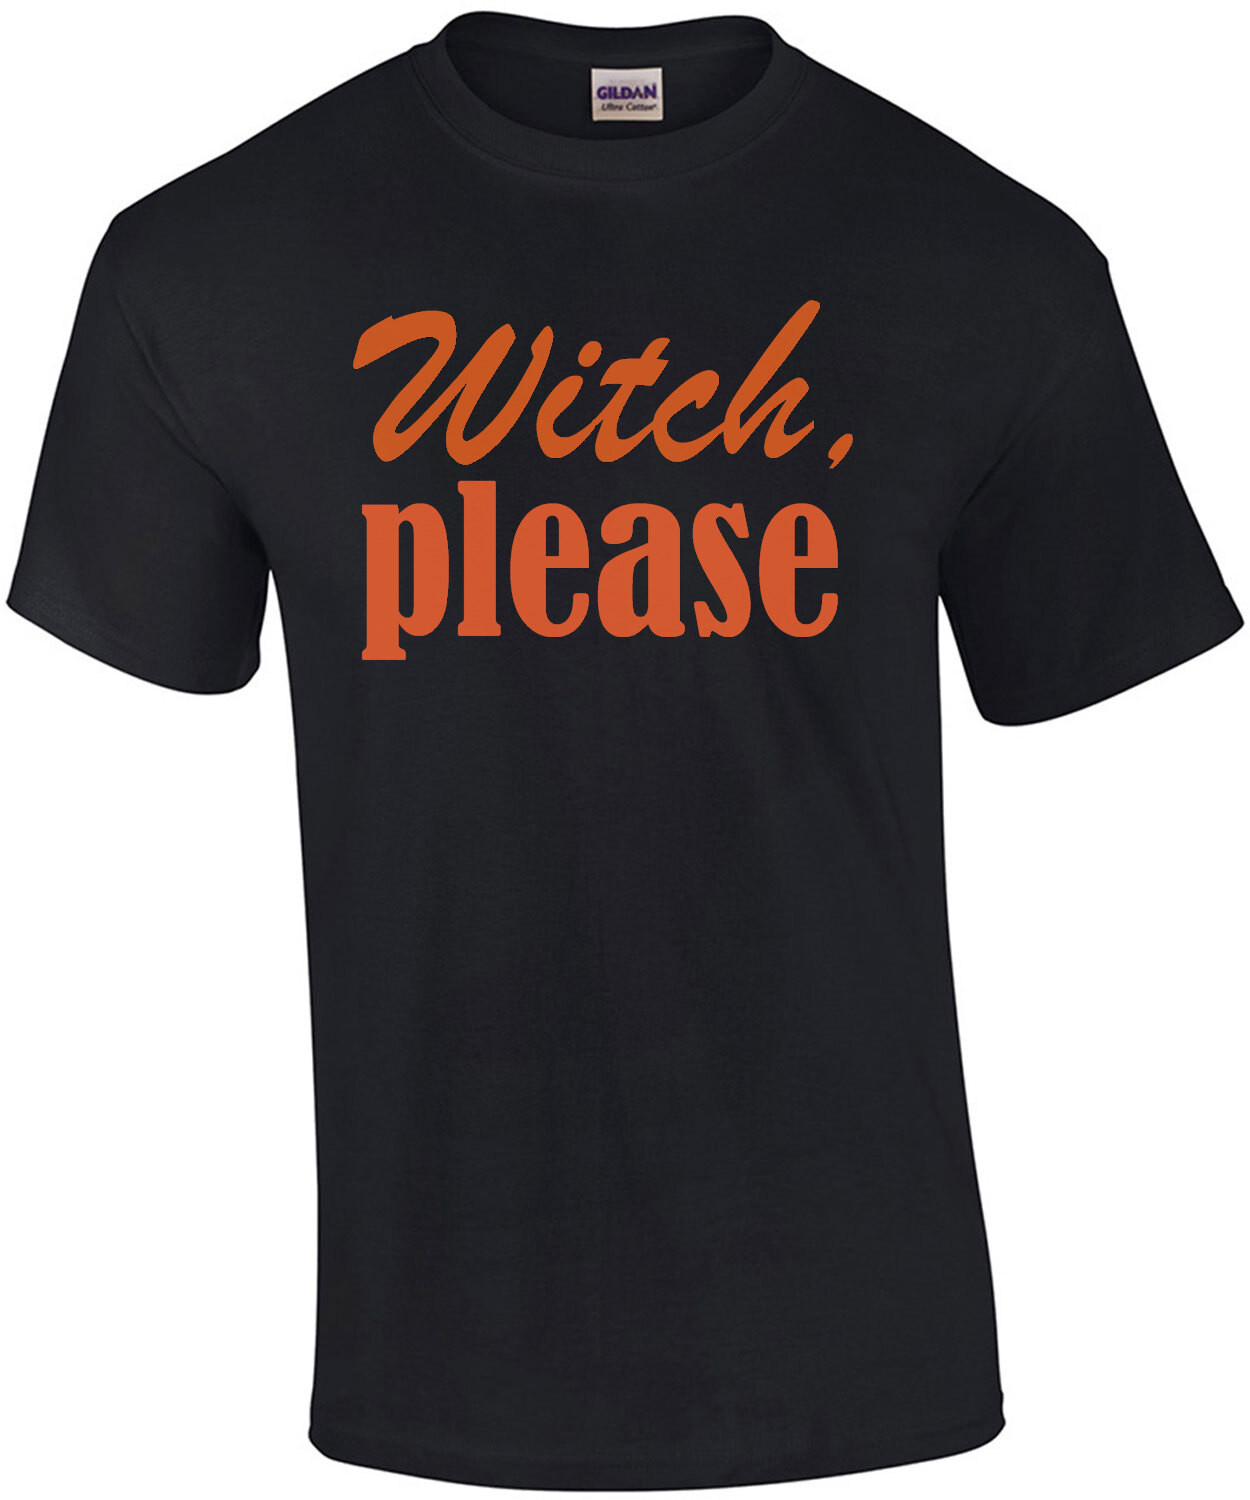 Witch, please - Funny Halloween T-Shirt